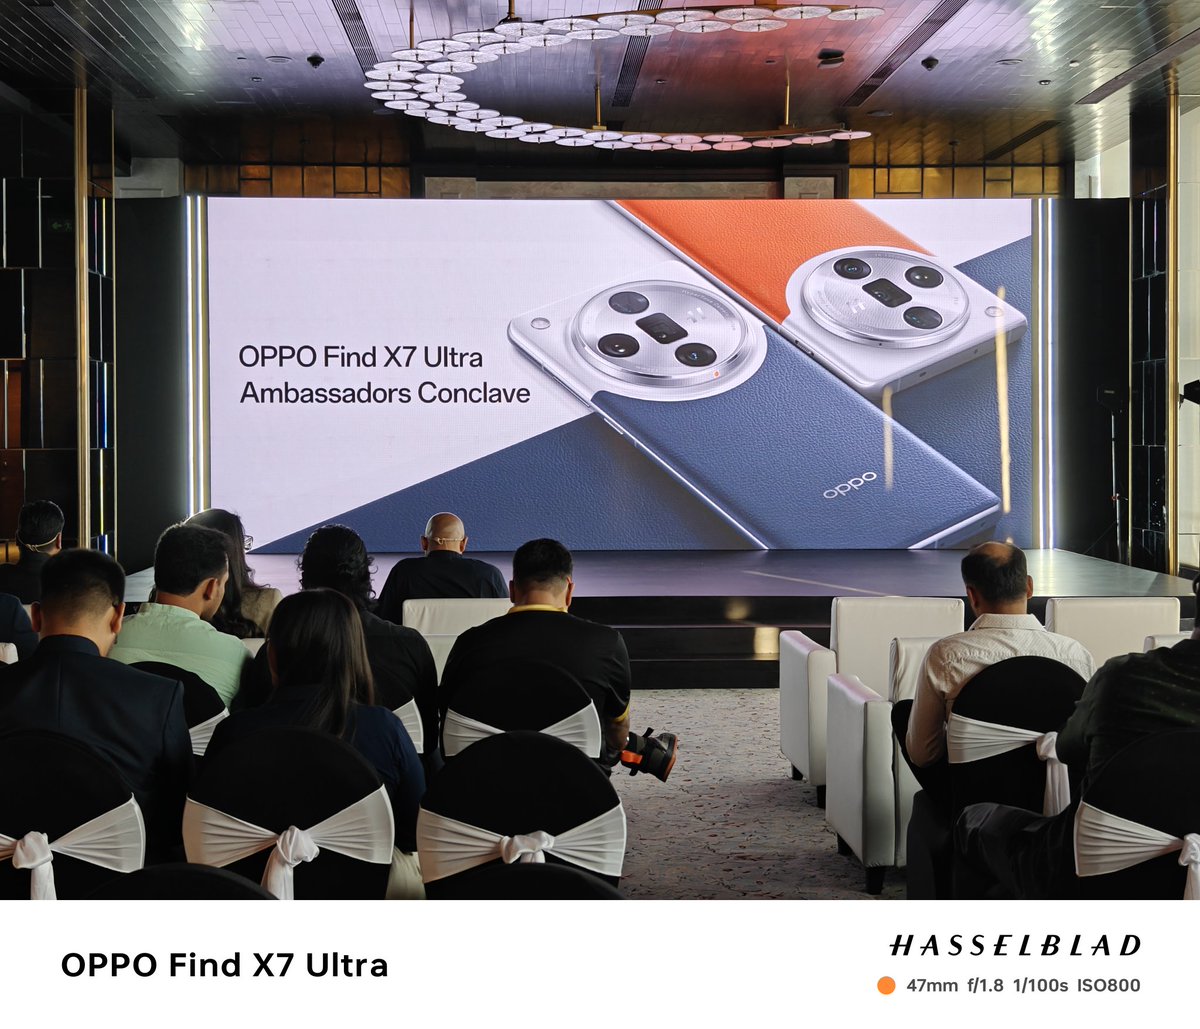 I am at the Oppo Find X7 Ultra Ambassadors Conclave 

#OPPOFindX7Ultra #FindX7Ultra #Oppo